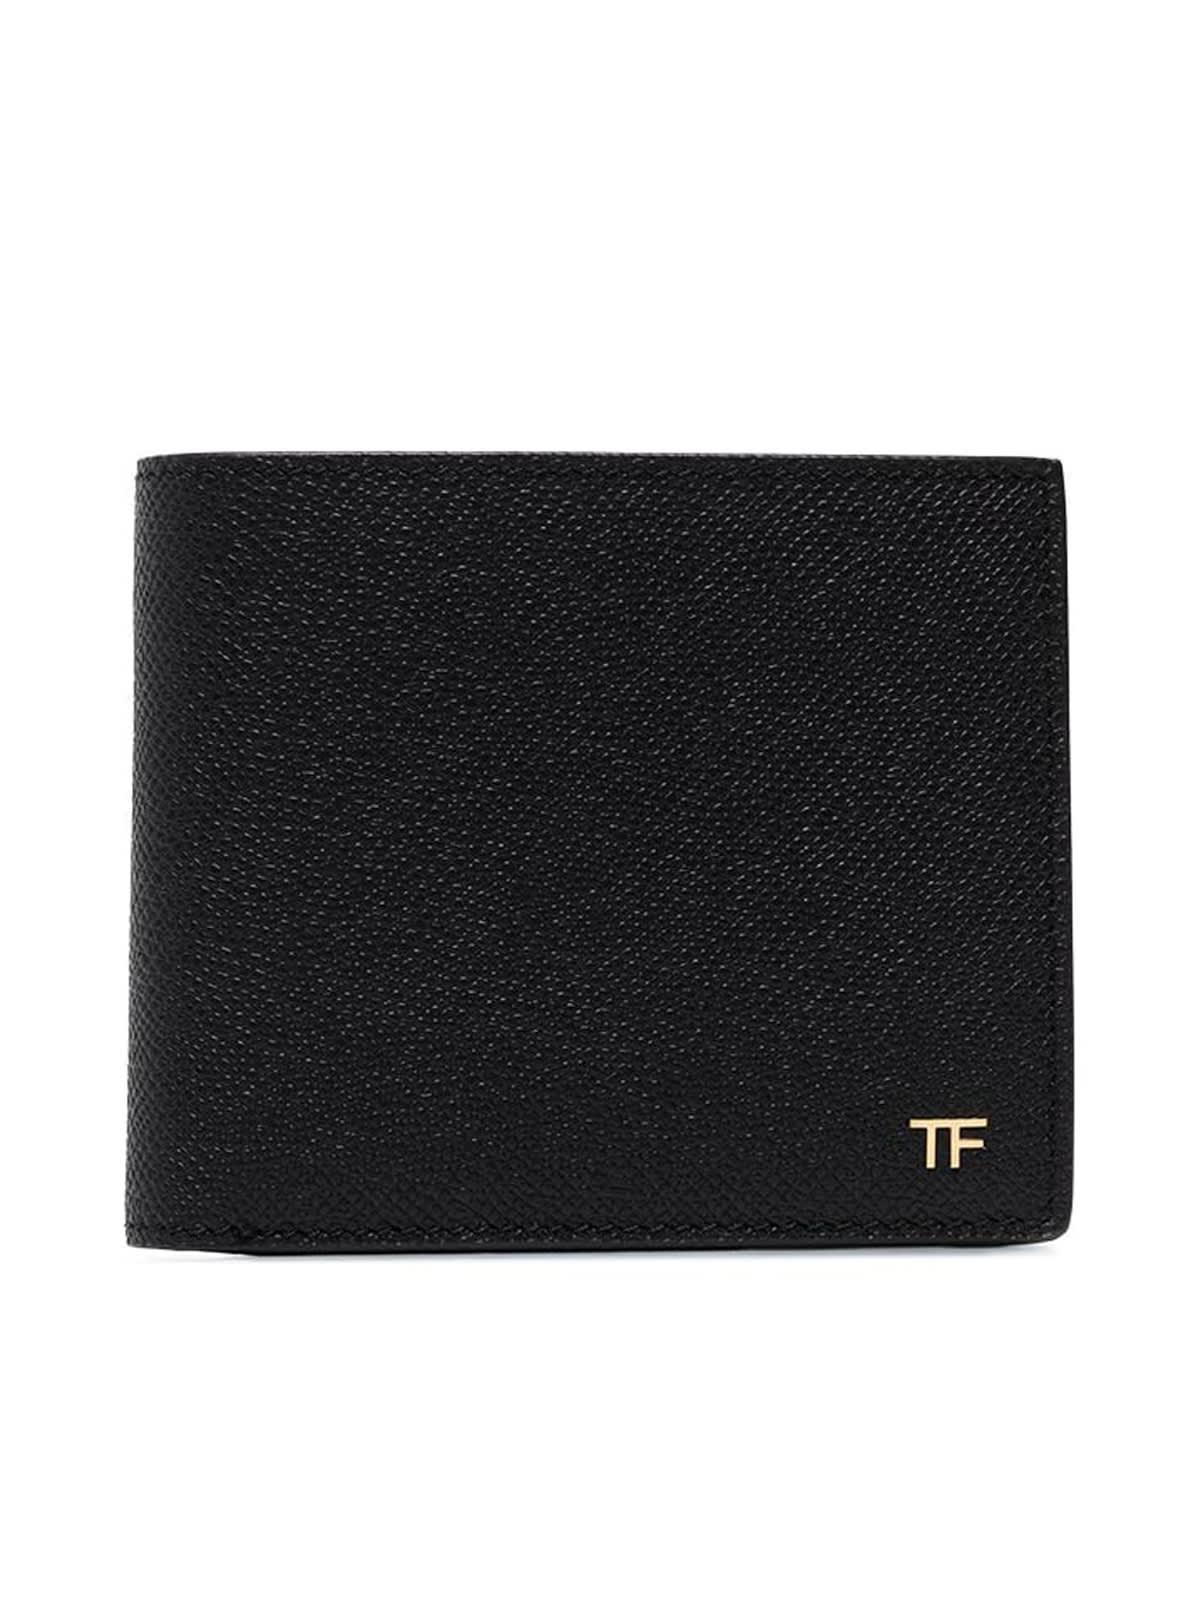 Tom Ford Solid Blue Smooth NWT 100% Calf Leather Bifold Wallet Card Holder $400 